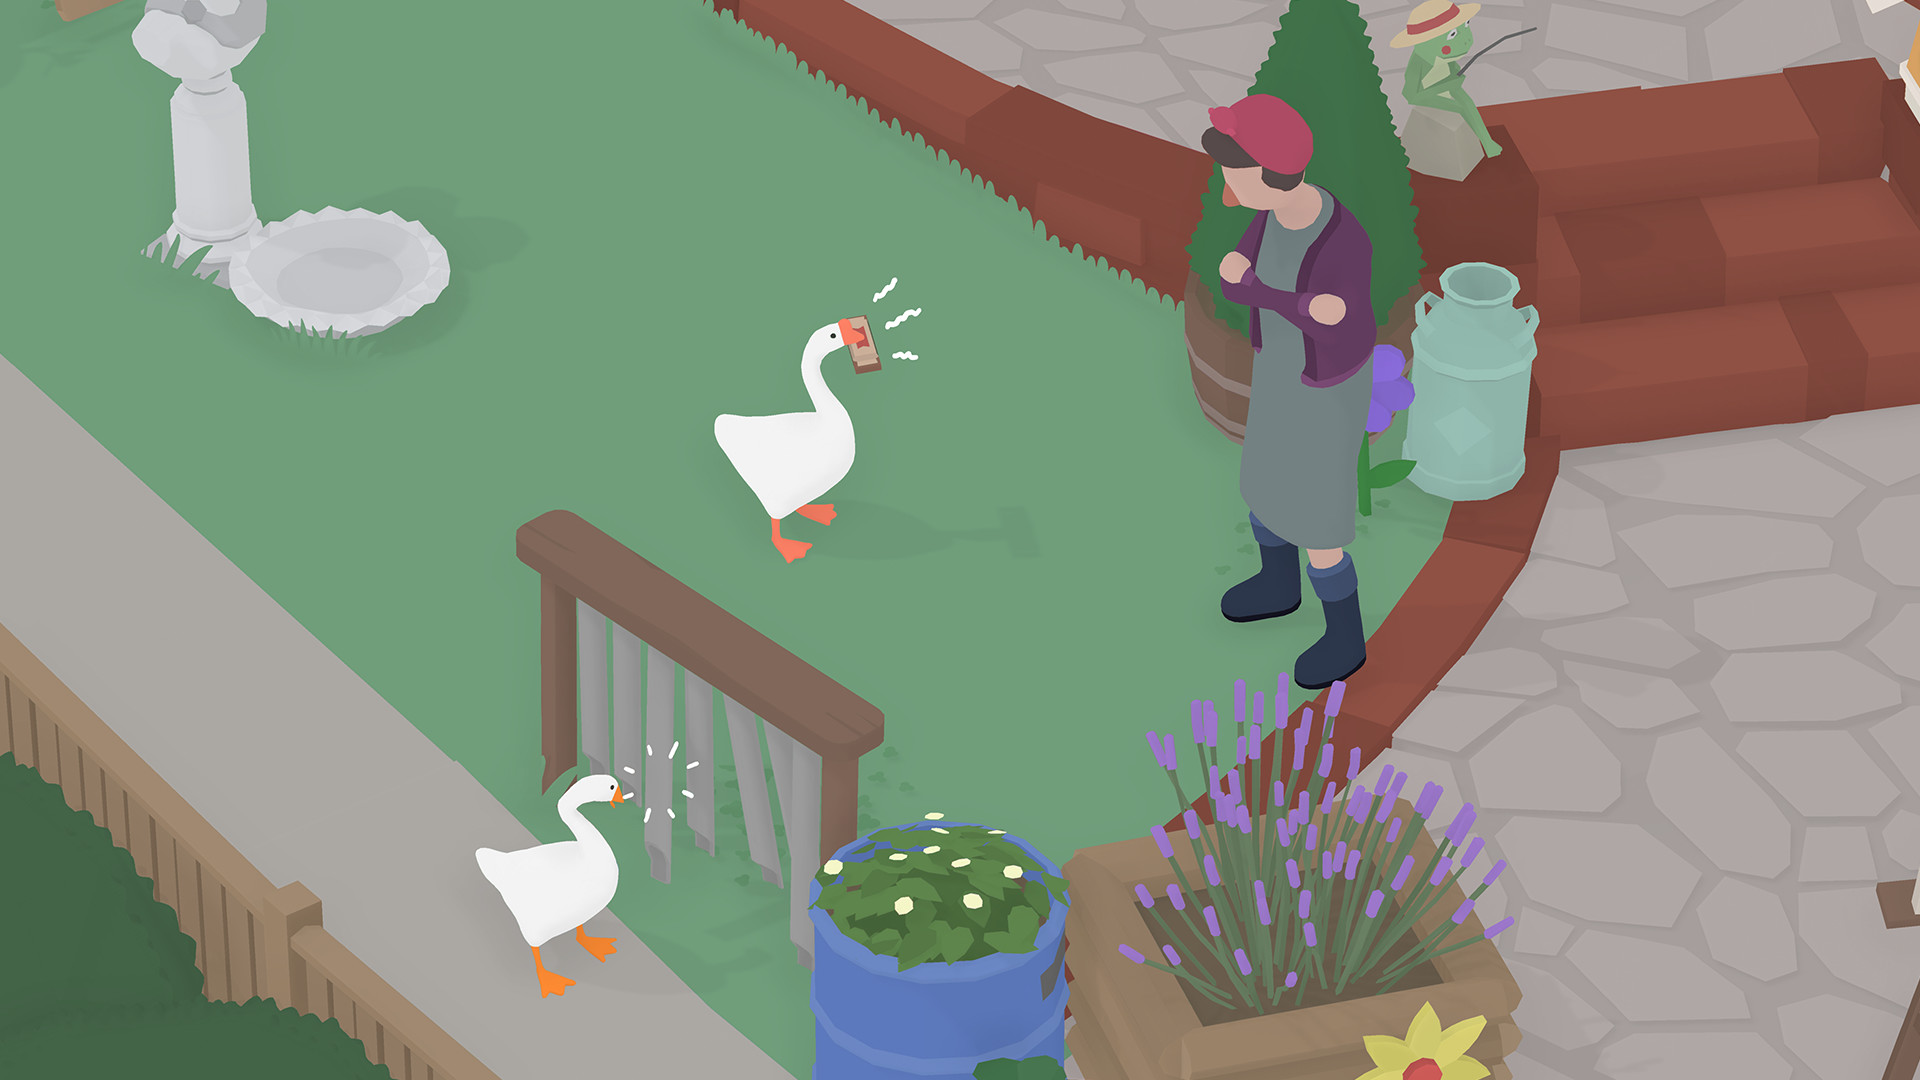 untitled goose game 2 download free